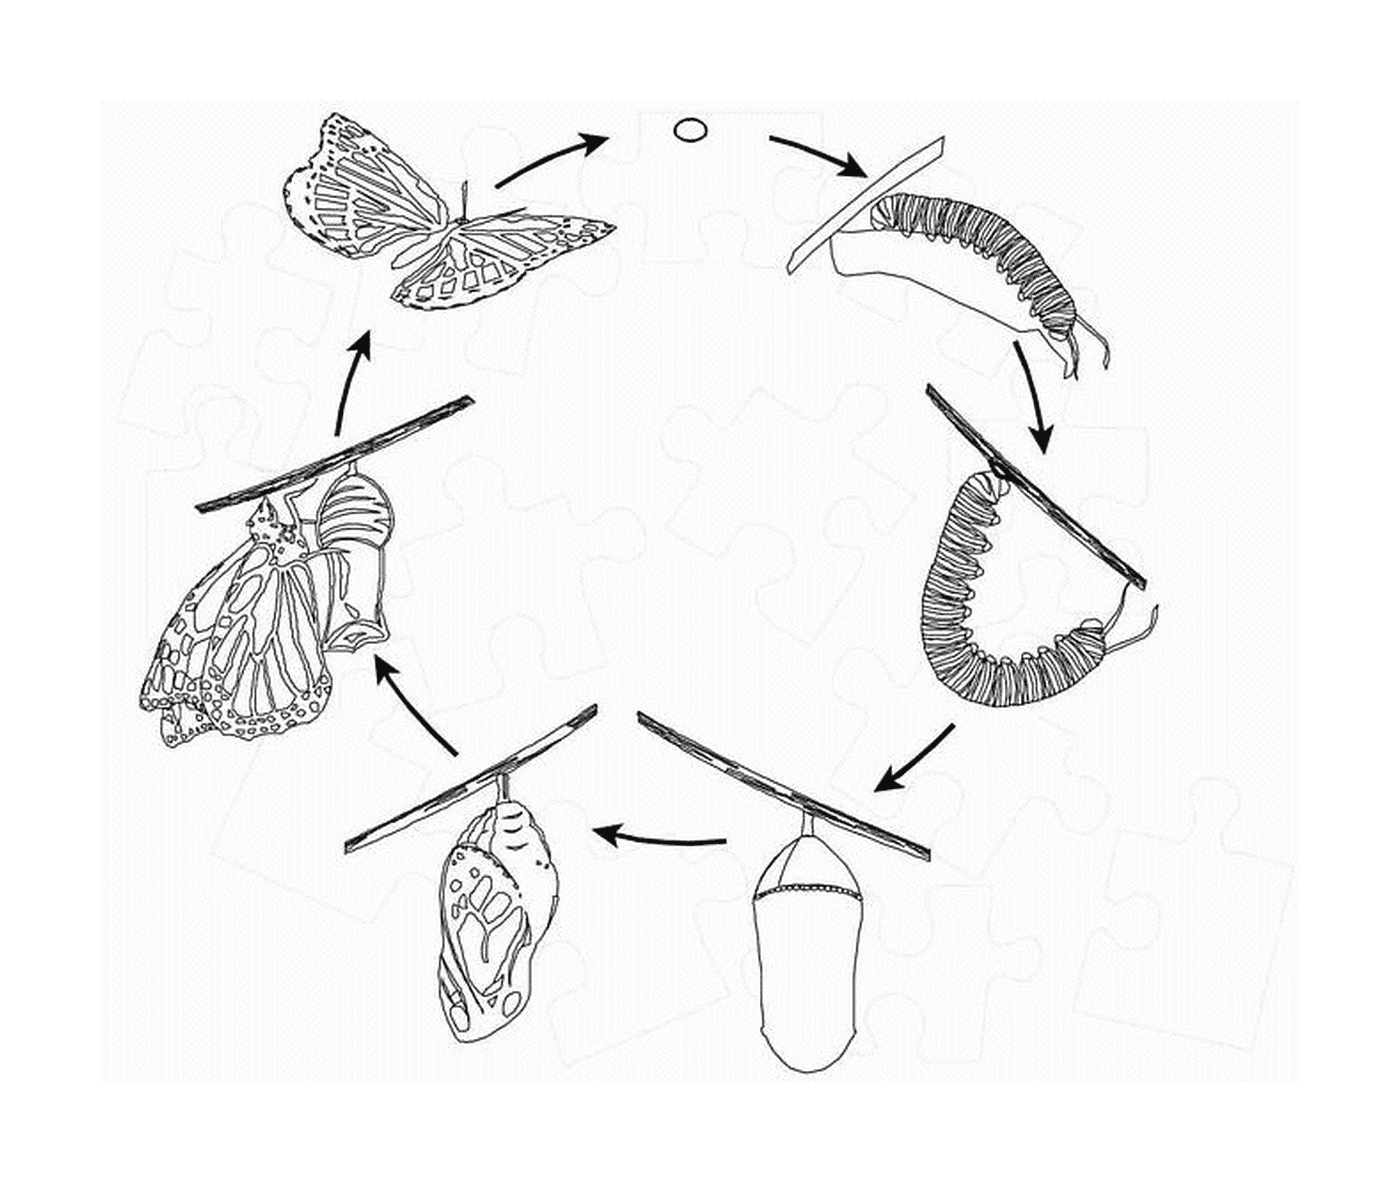  butterfly life cycle 